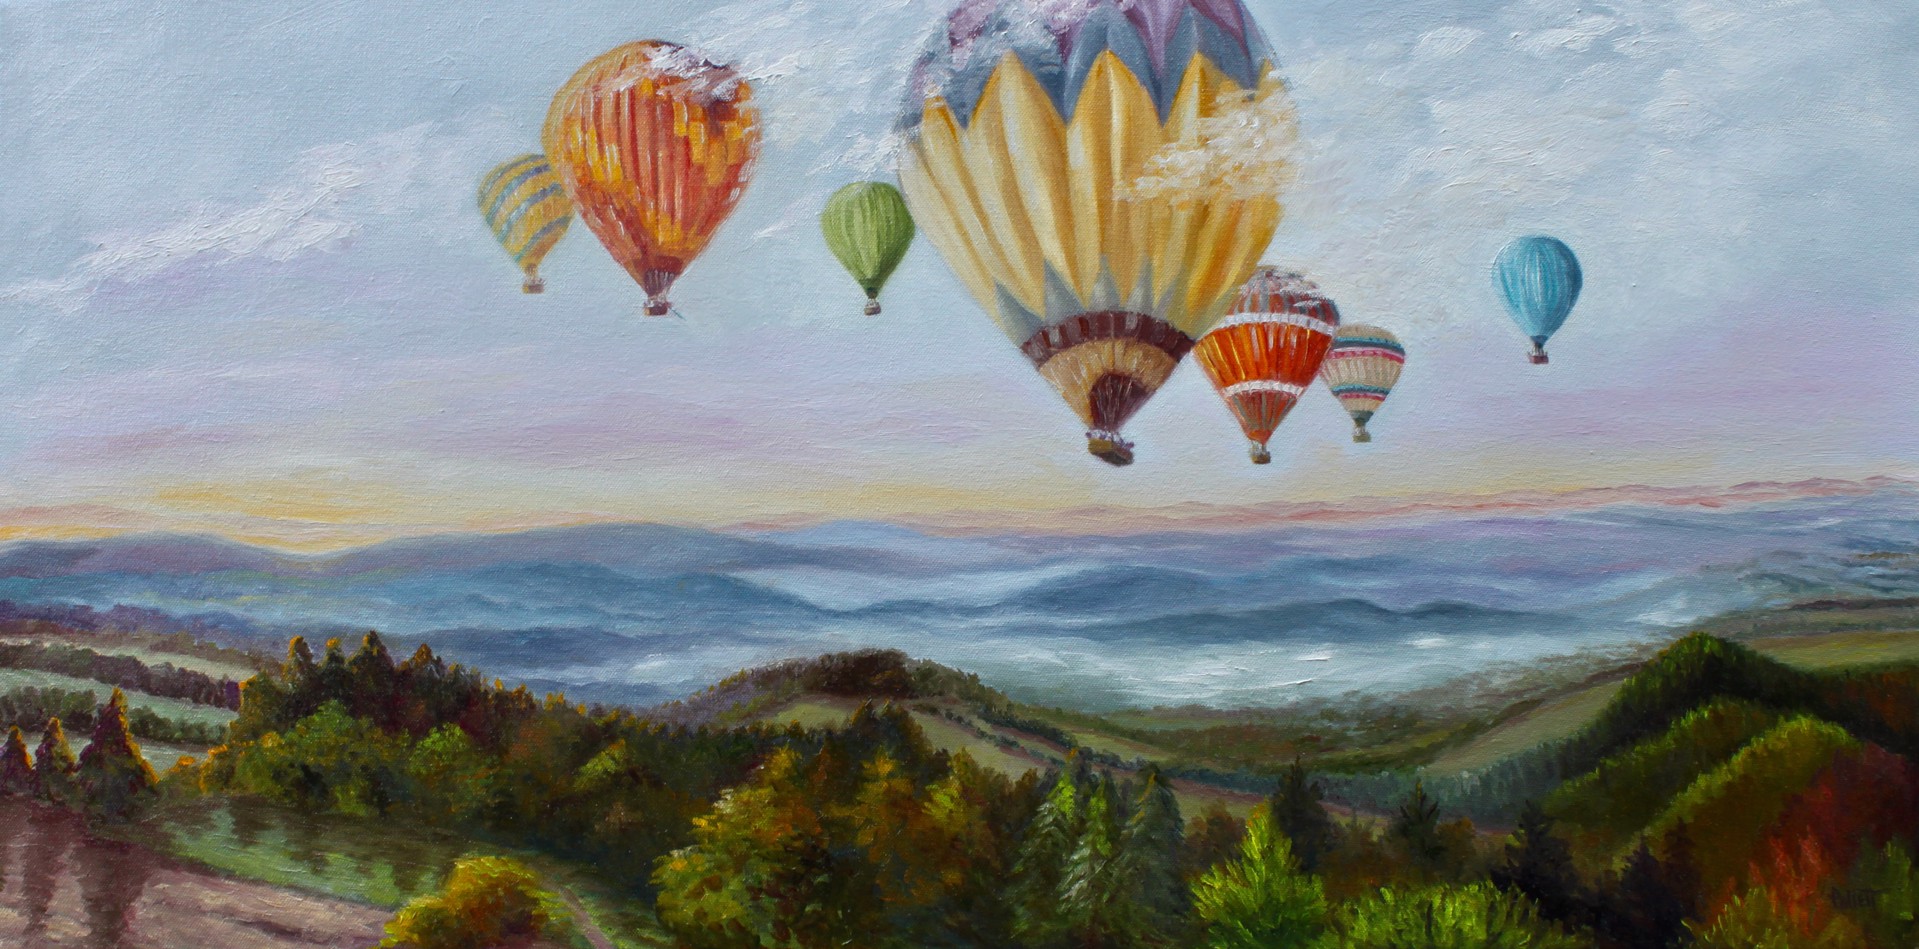 View From the Top by Cynthia Jewell Pollett